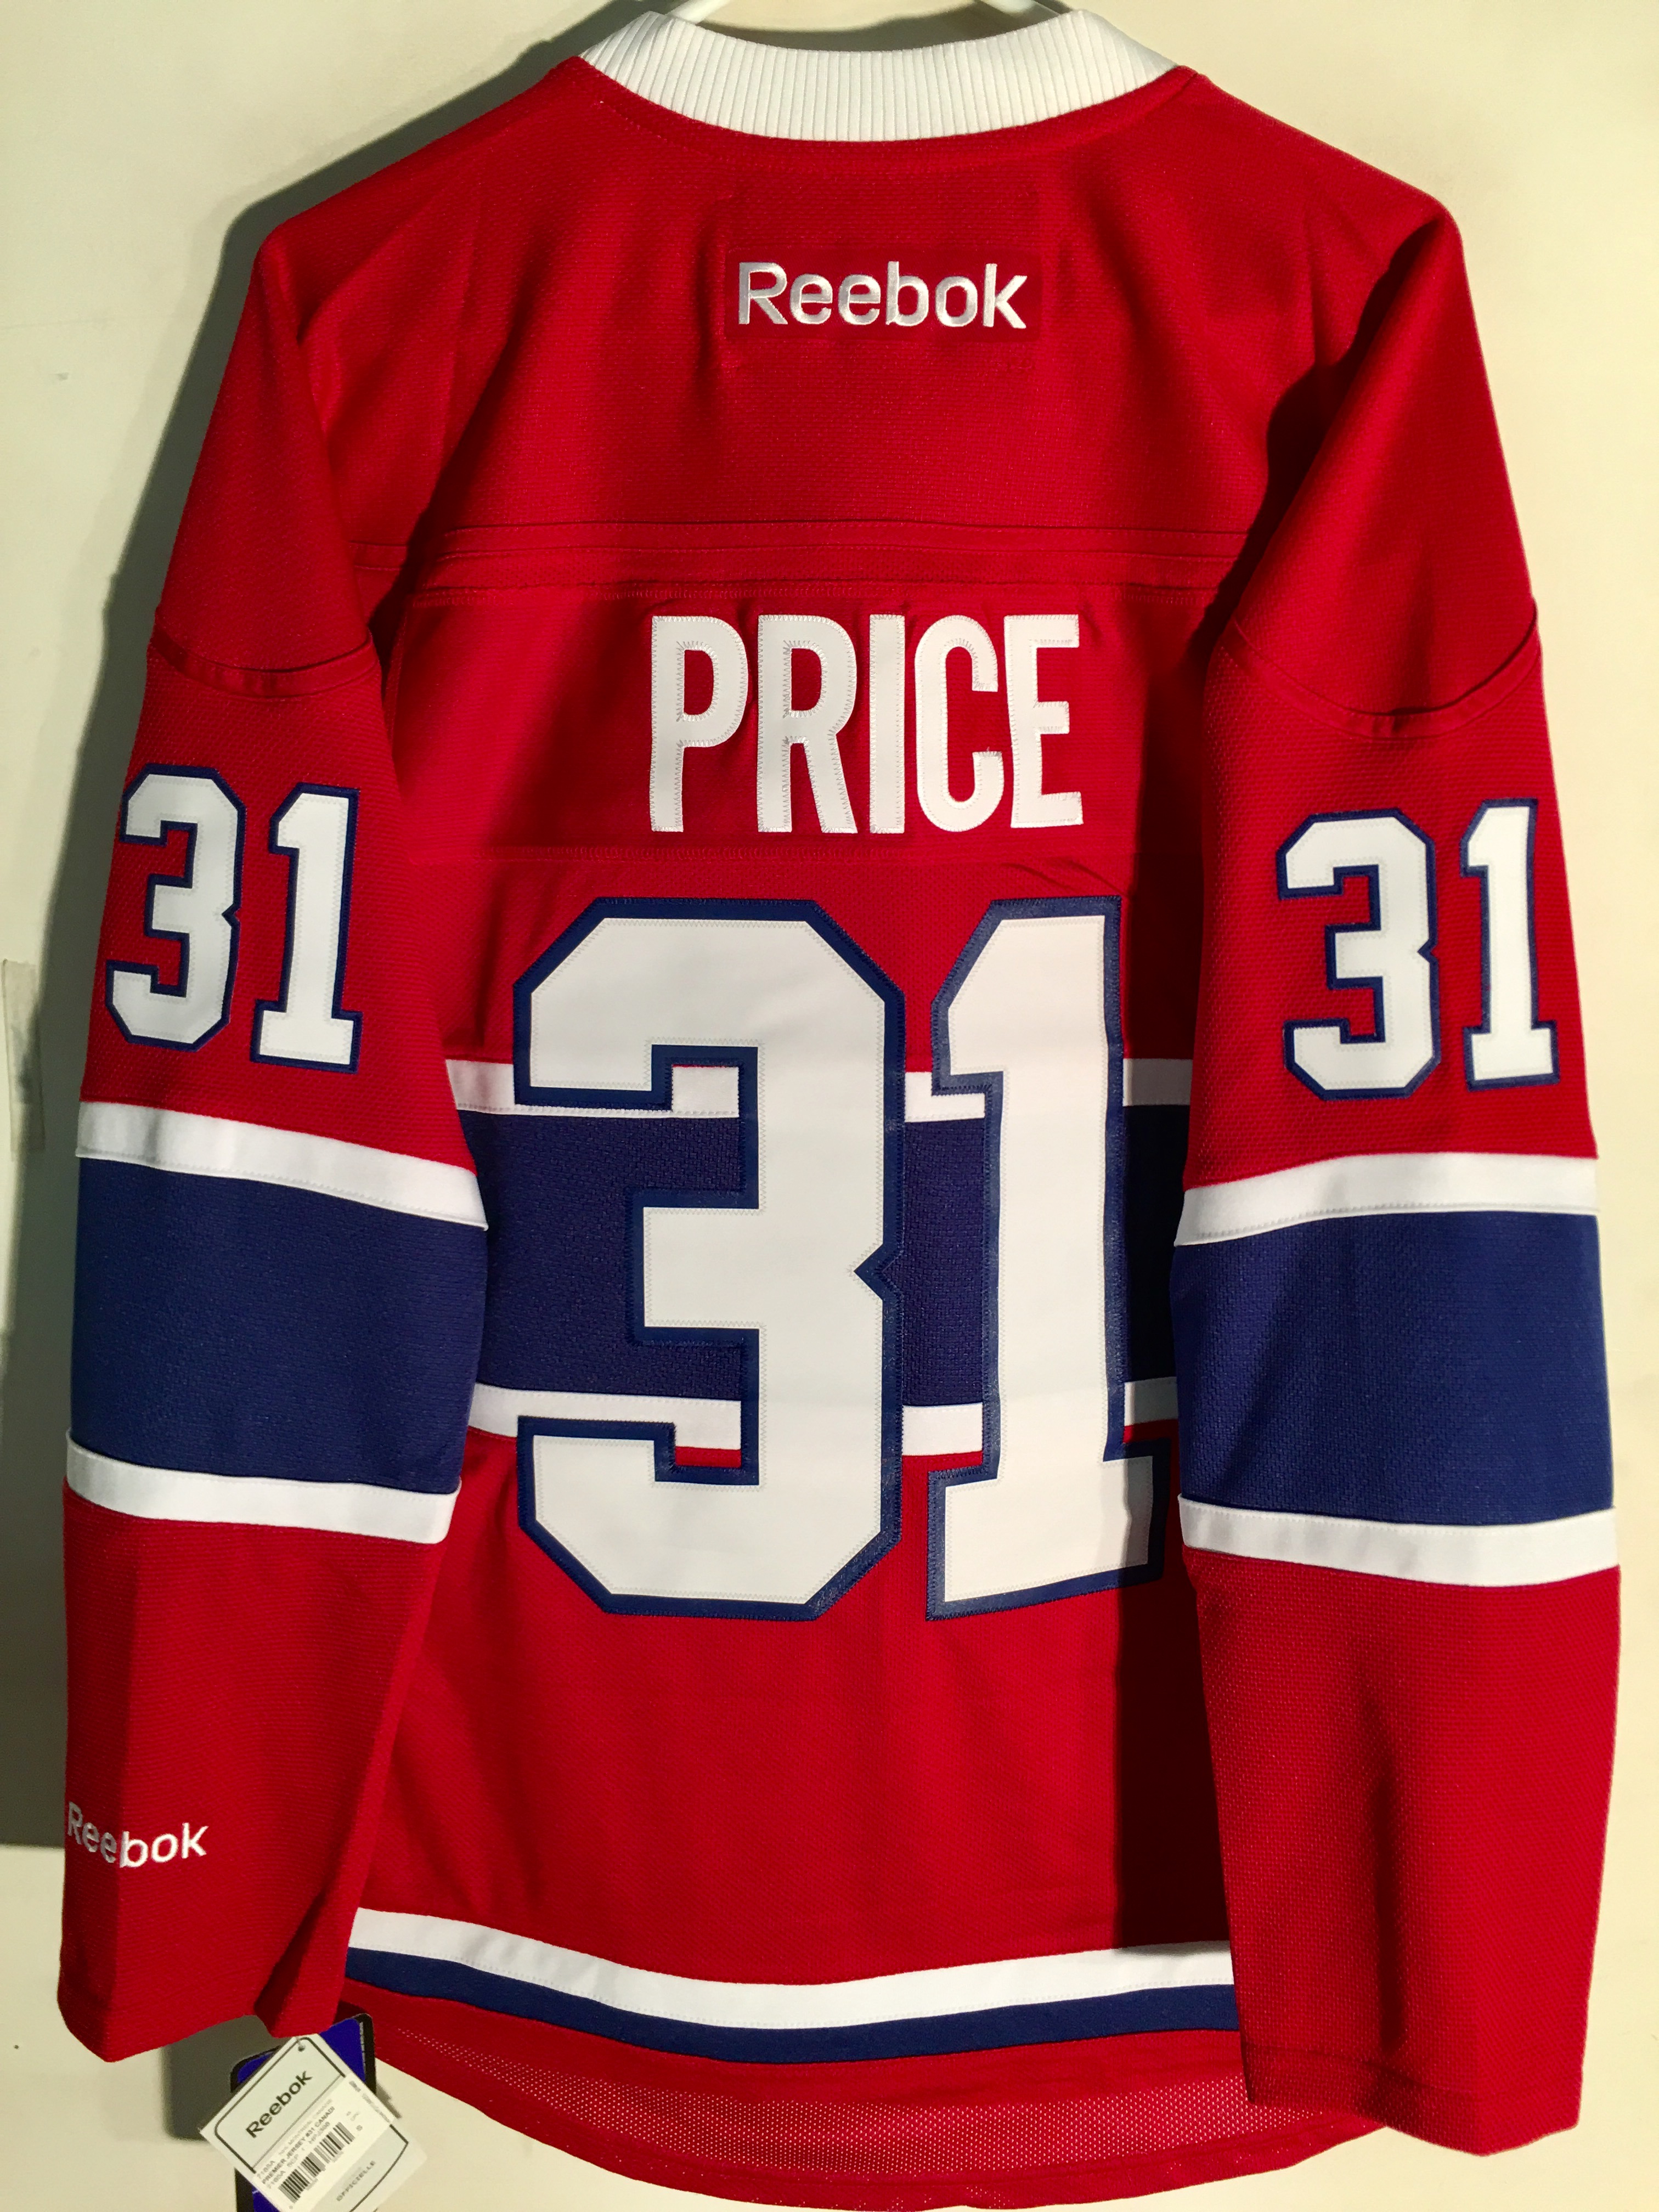 canadiens price jersey